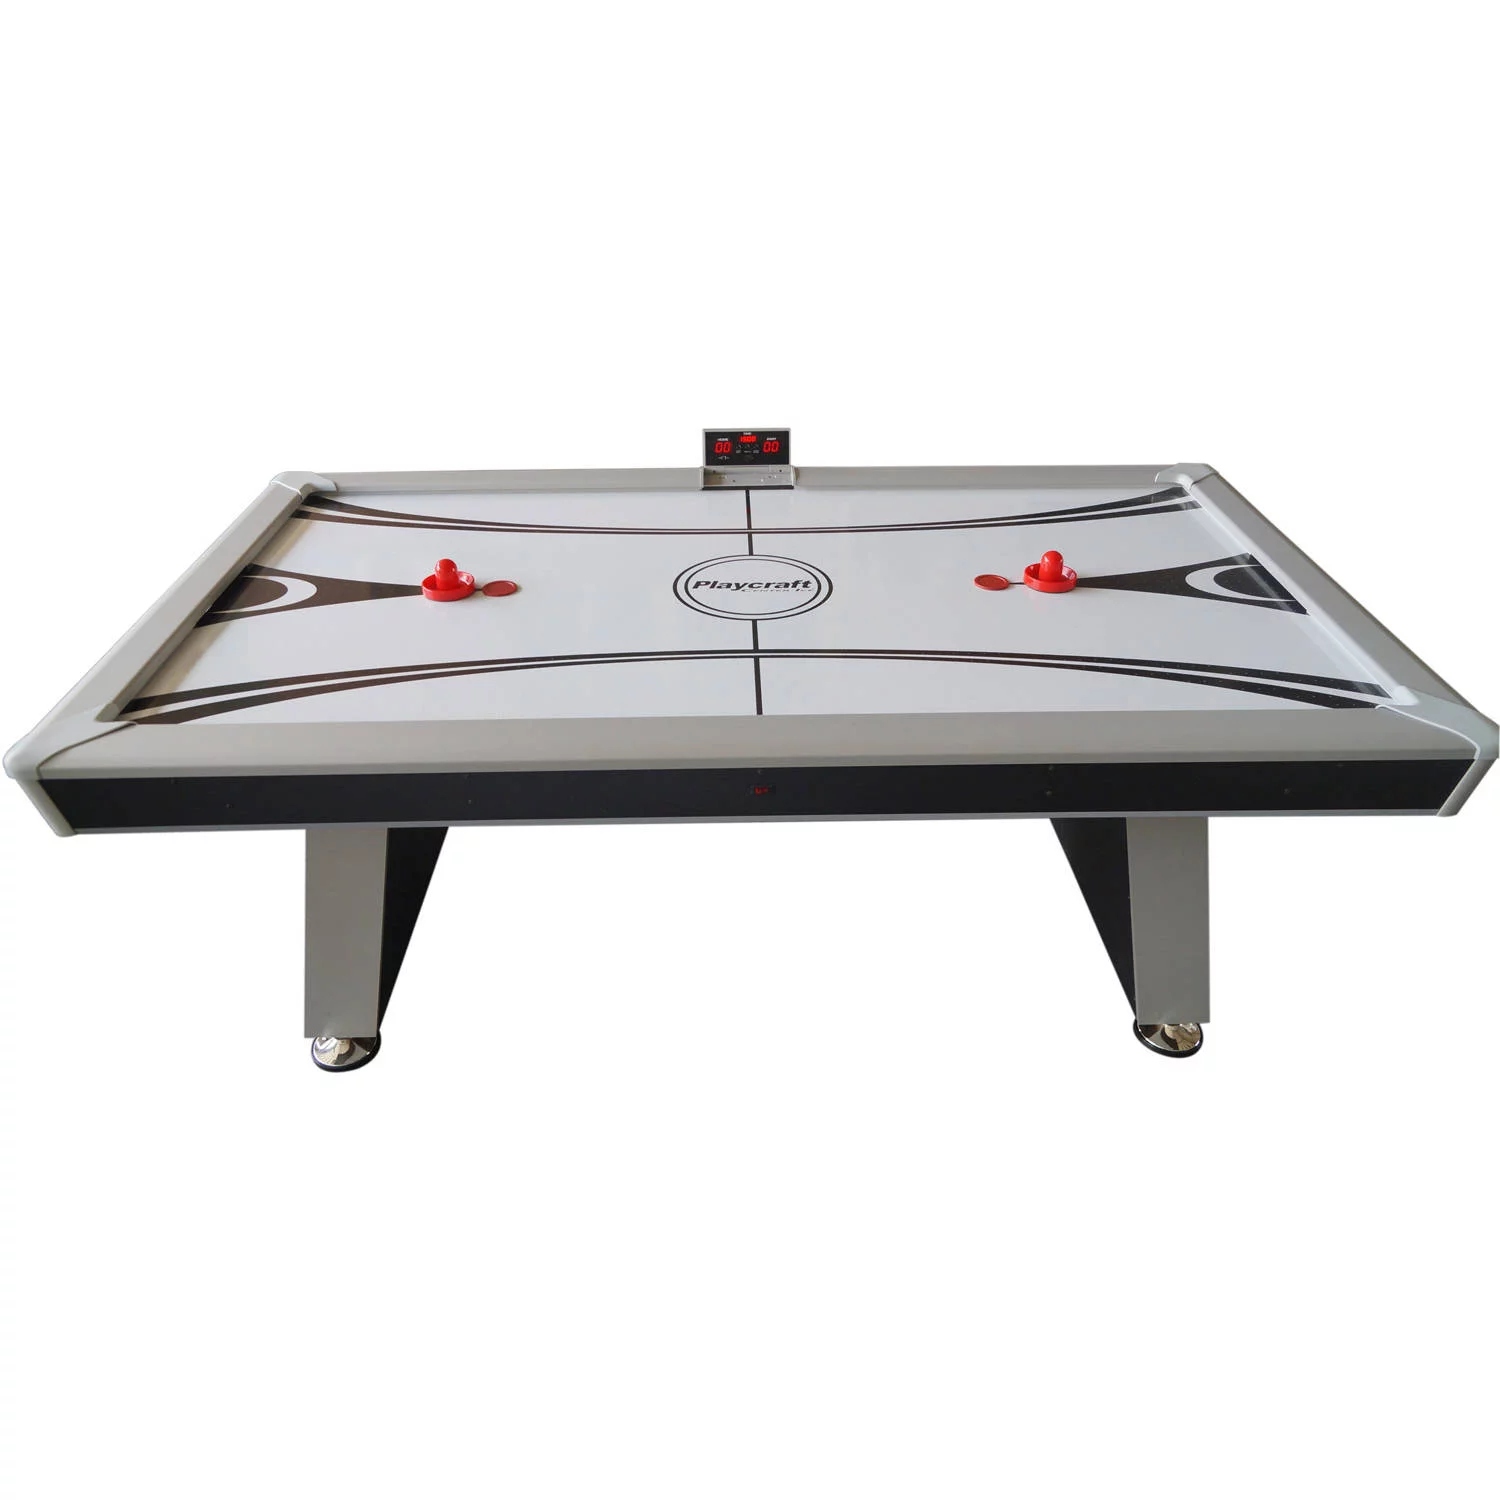 Pucks and pushers on the Playcraft - Center Ice 7' Air Hockey Table's playing surface